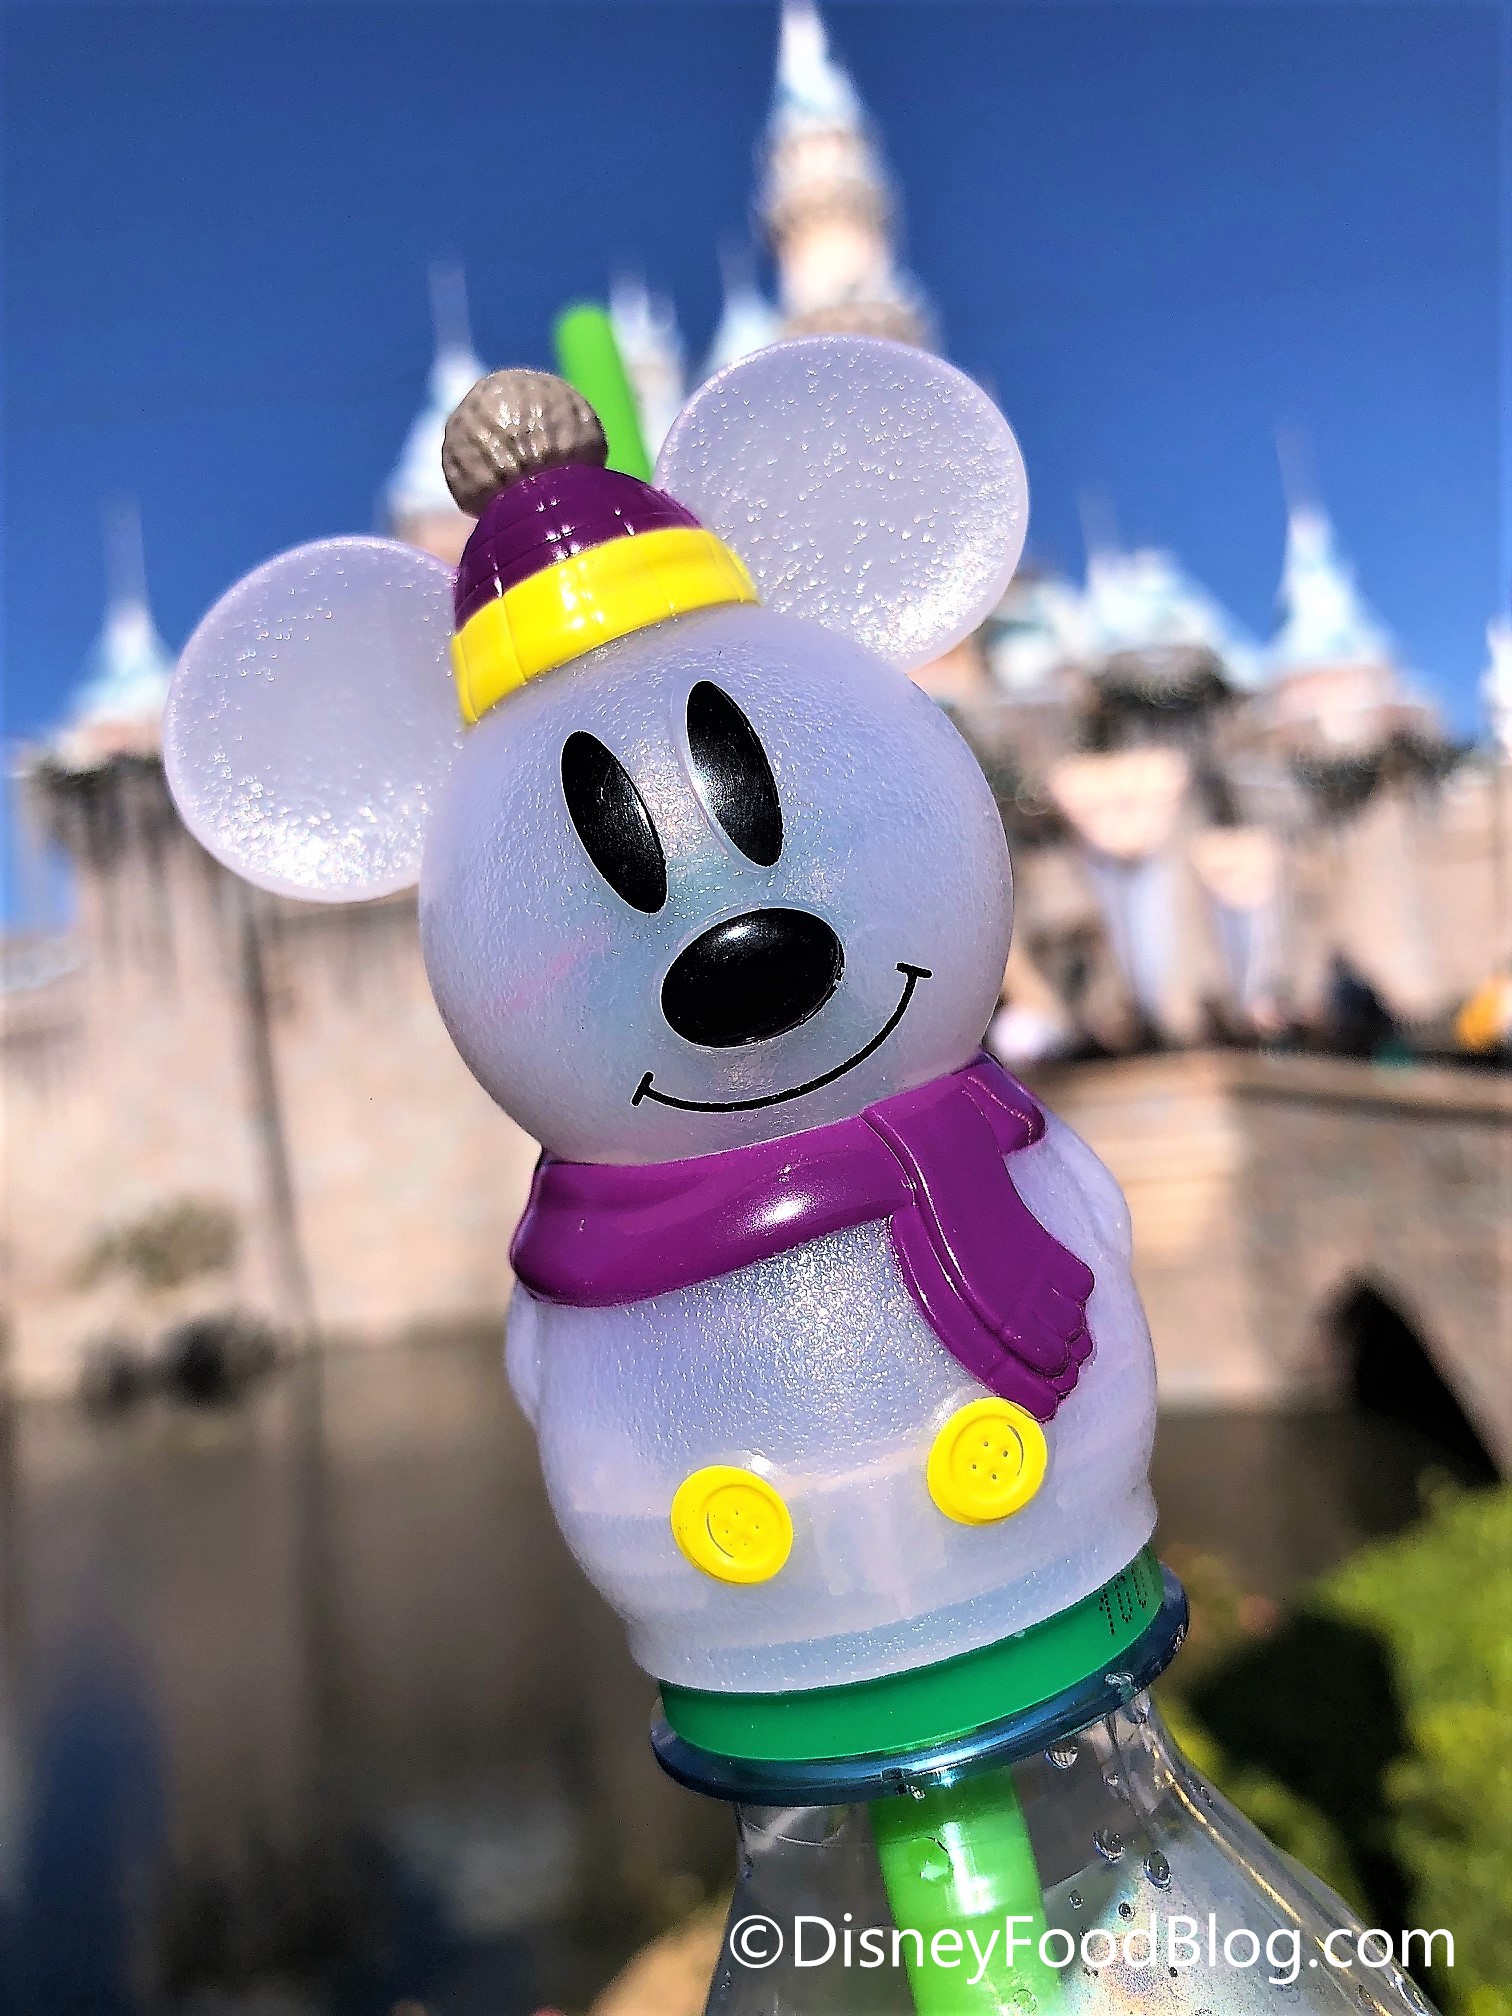 Disney Chef Mickey Mouse Water Bottle